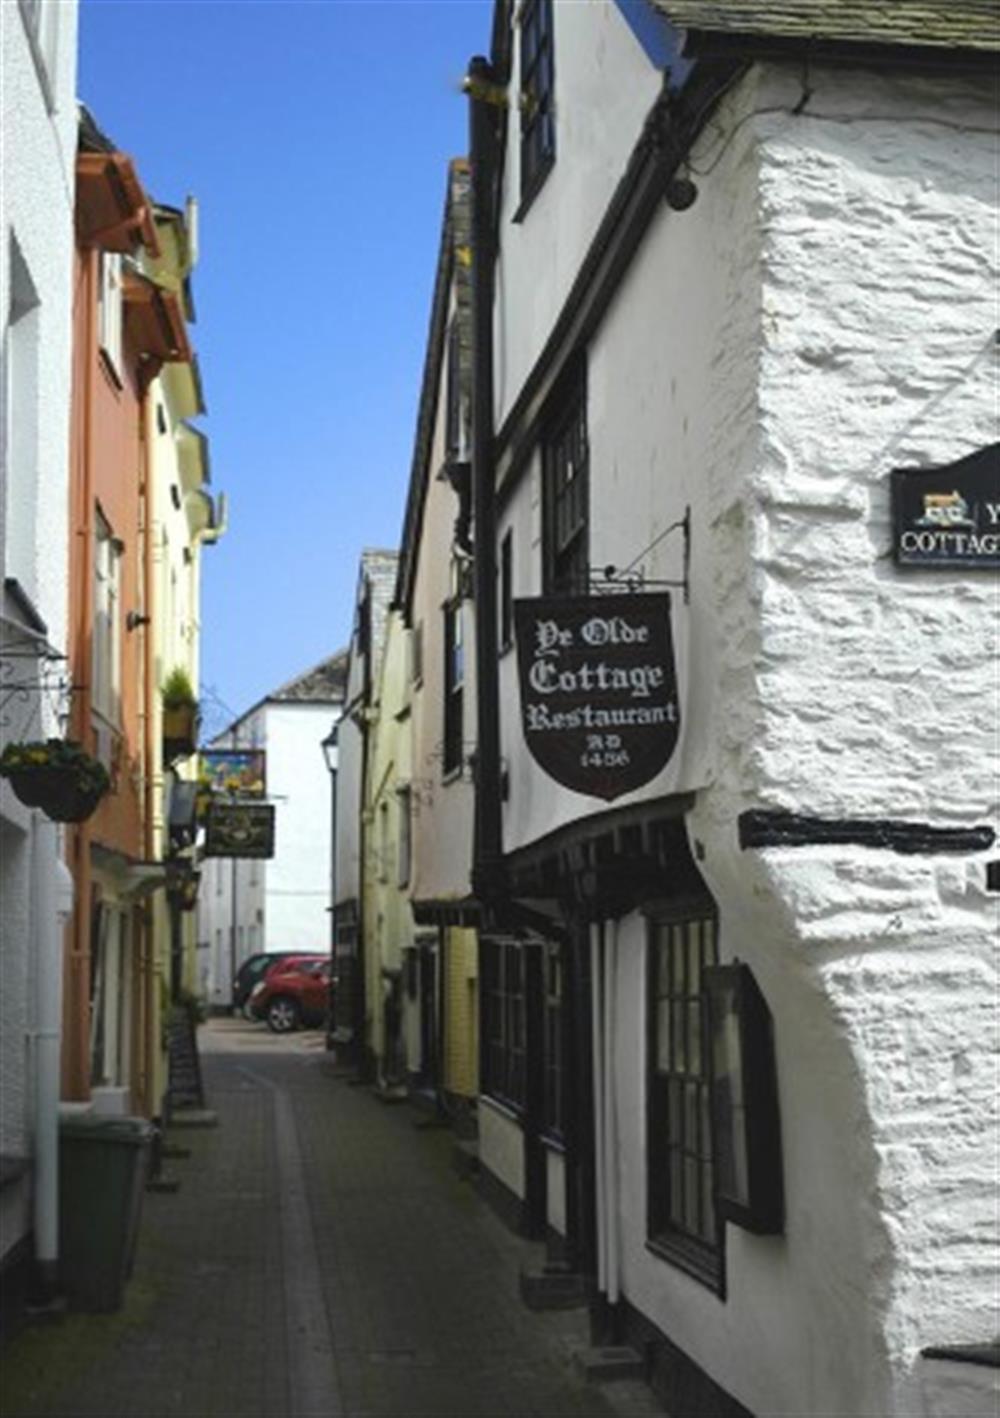 Part of the old town, East Looe